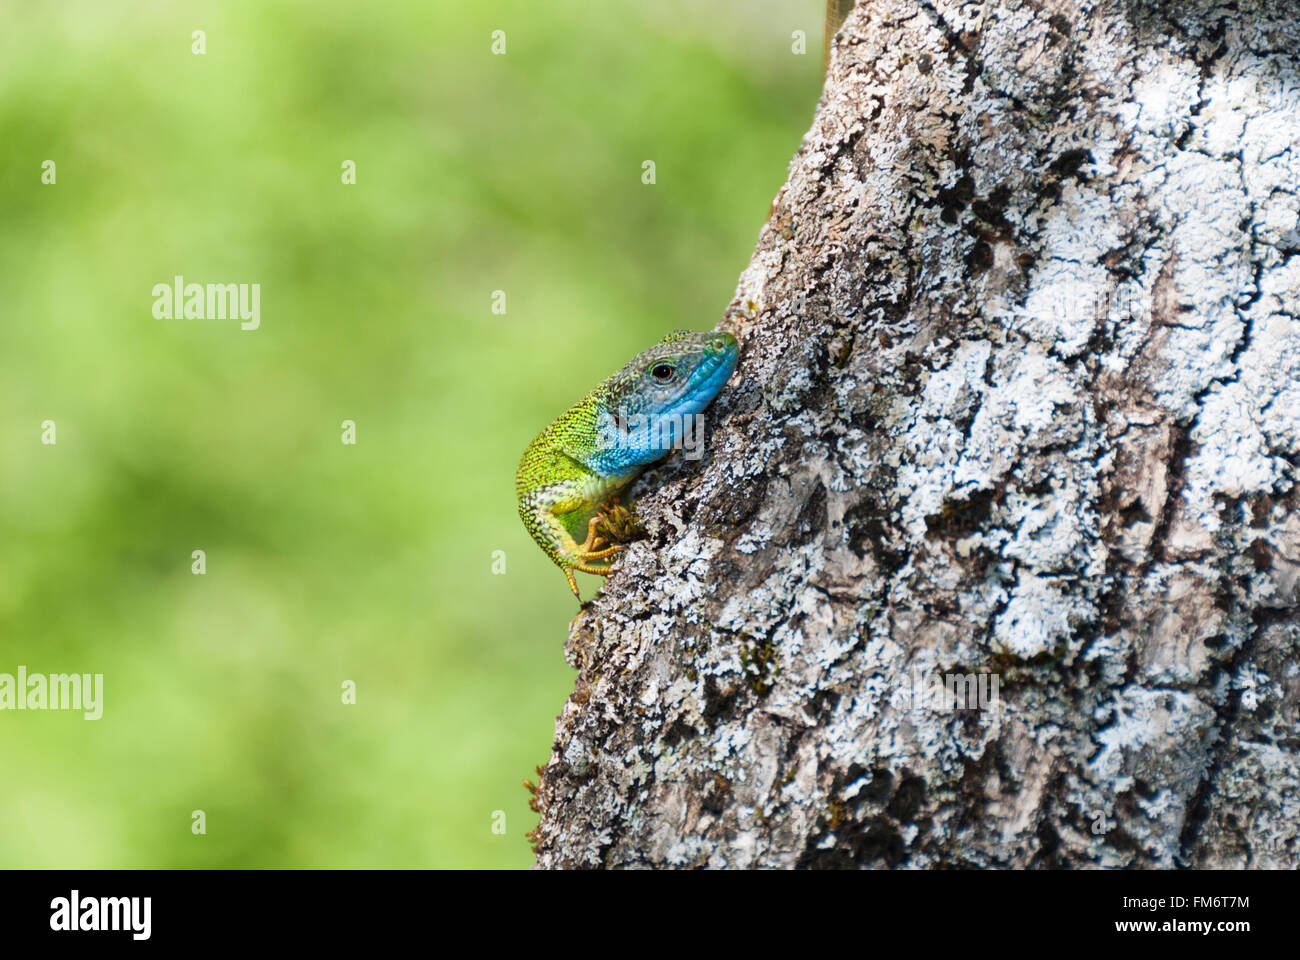 A green lizard with blue head hiding behind a tree trunk Stock Photo